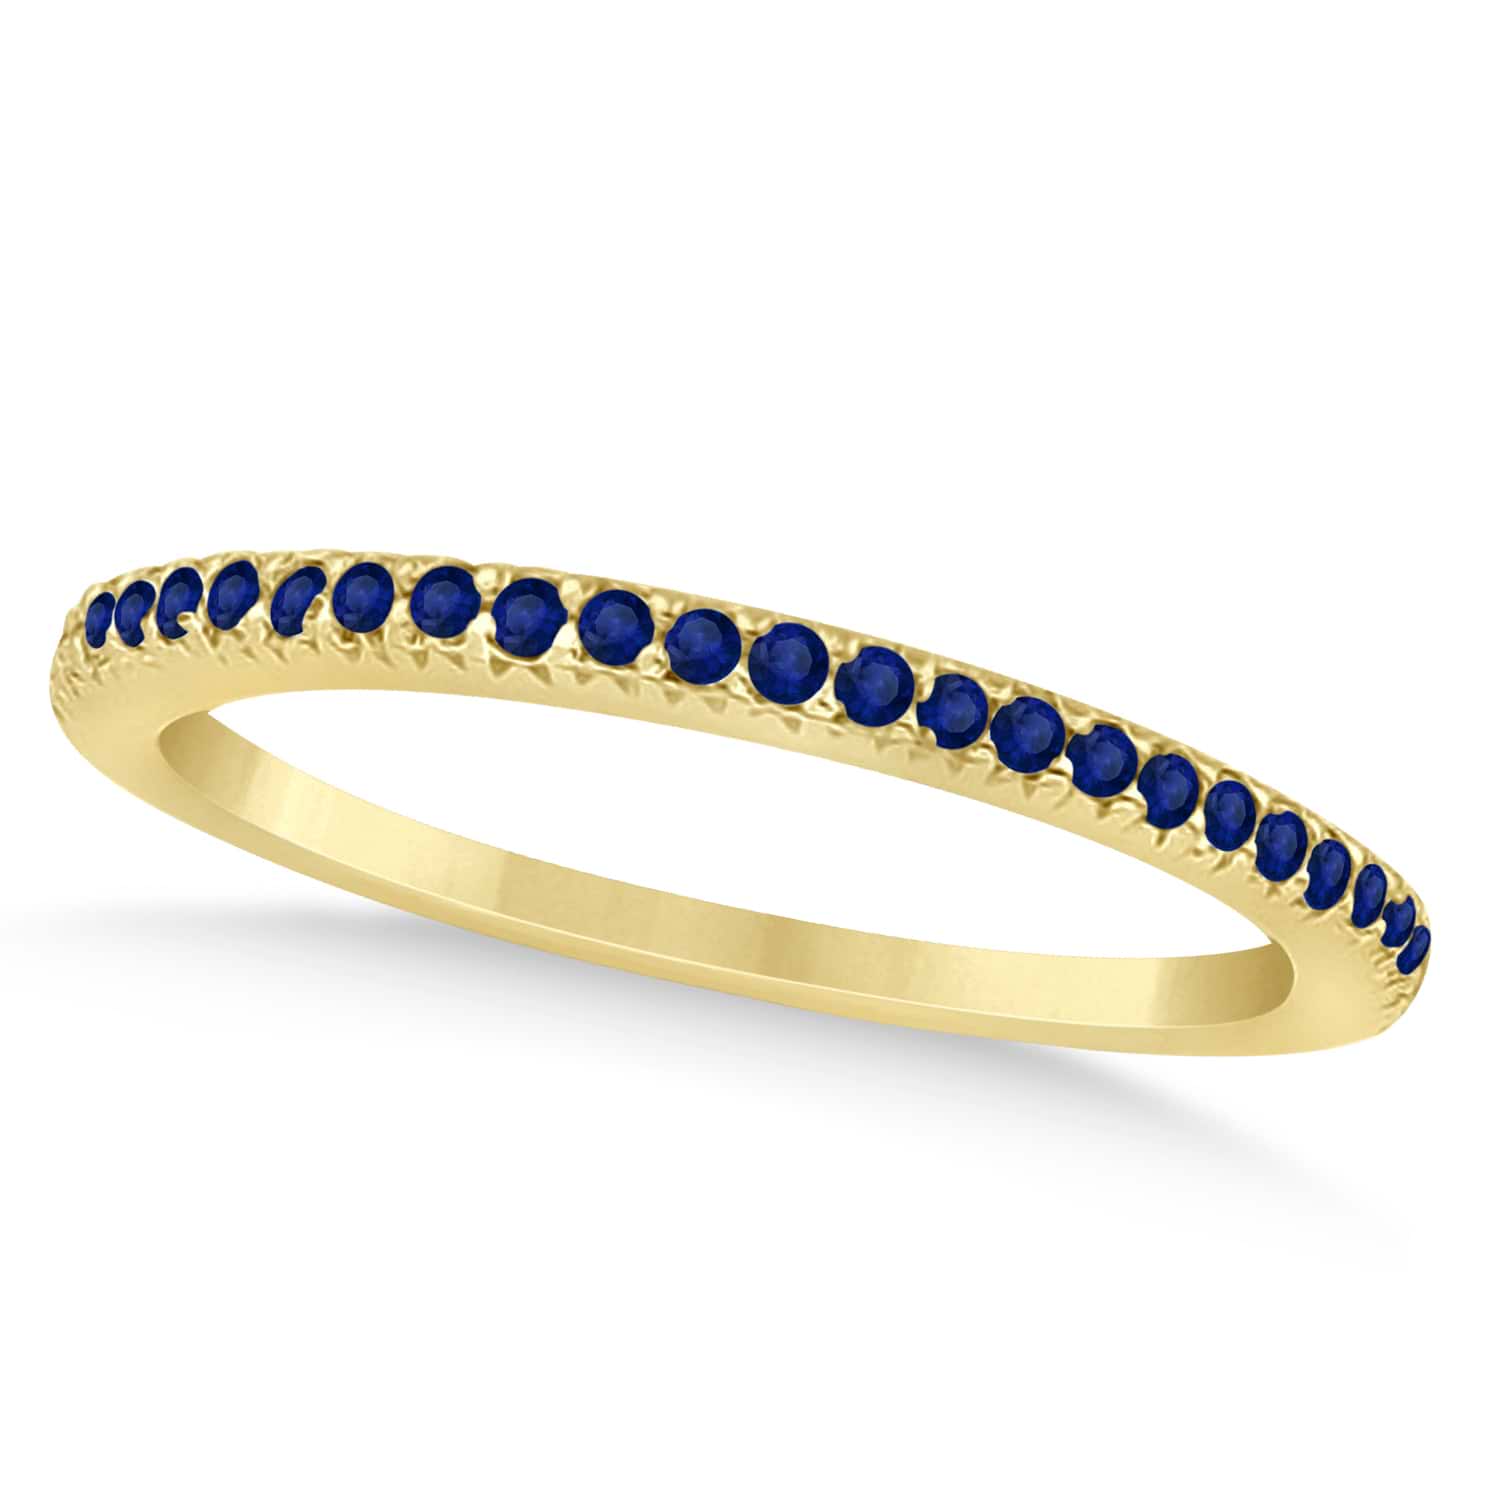 Blue Sapphire Accented Wedding Band 18k Yellow Gold 0.21ct